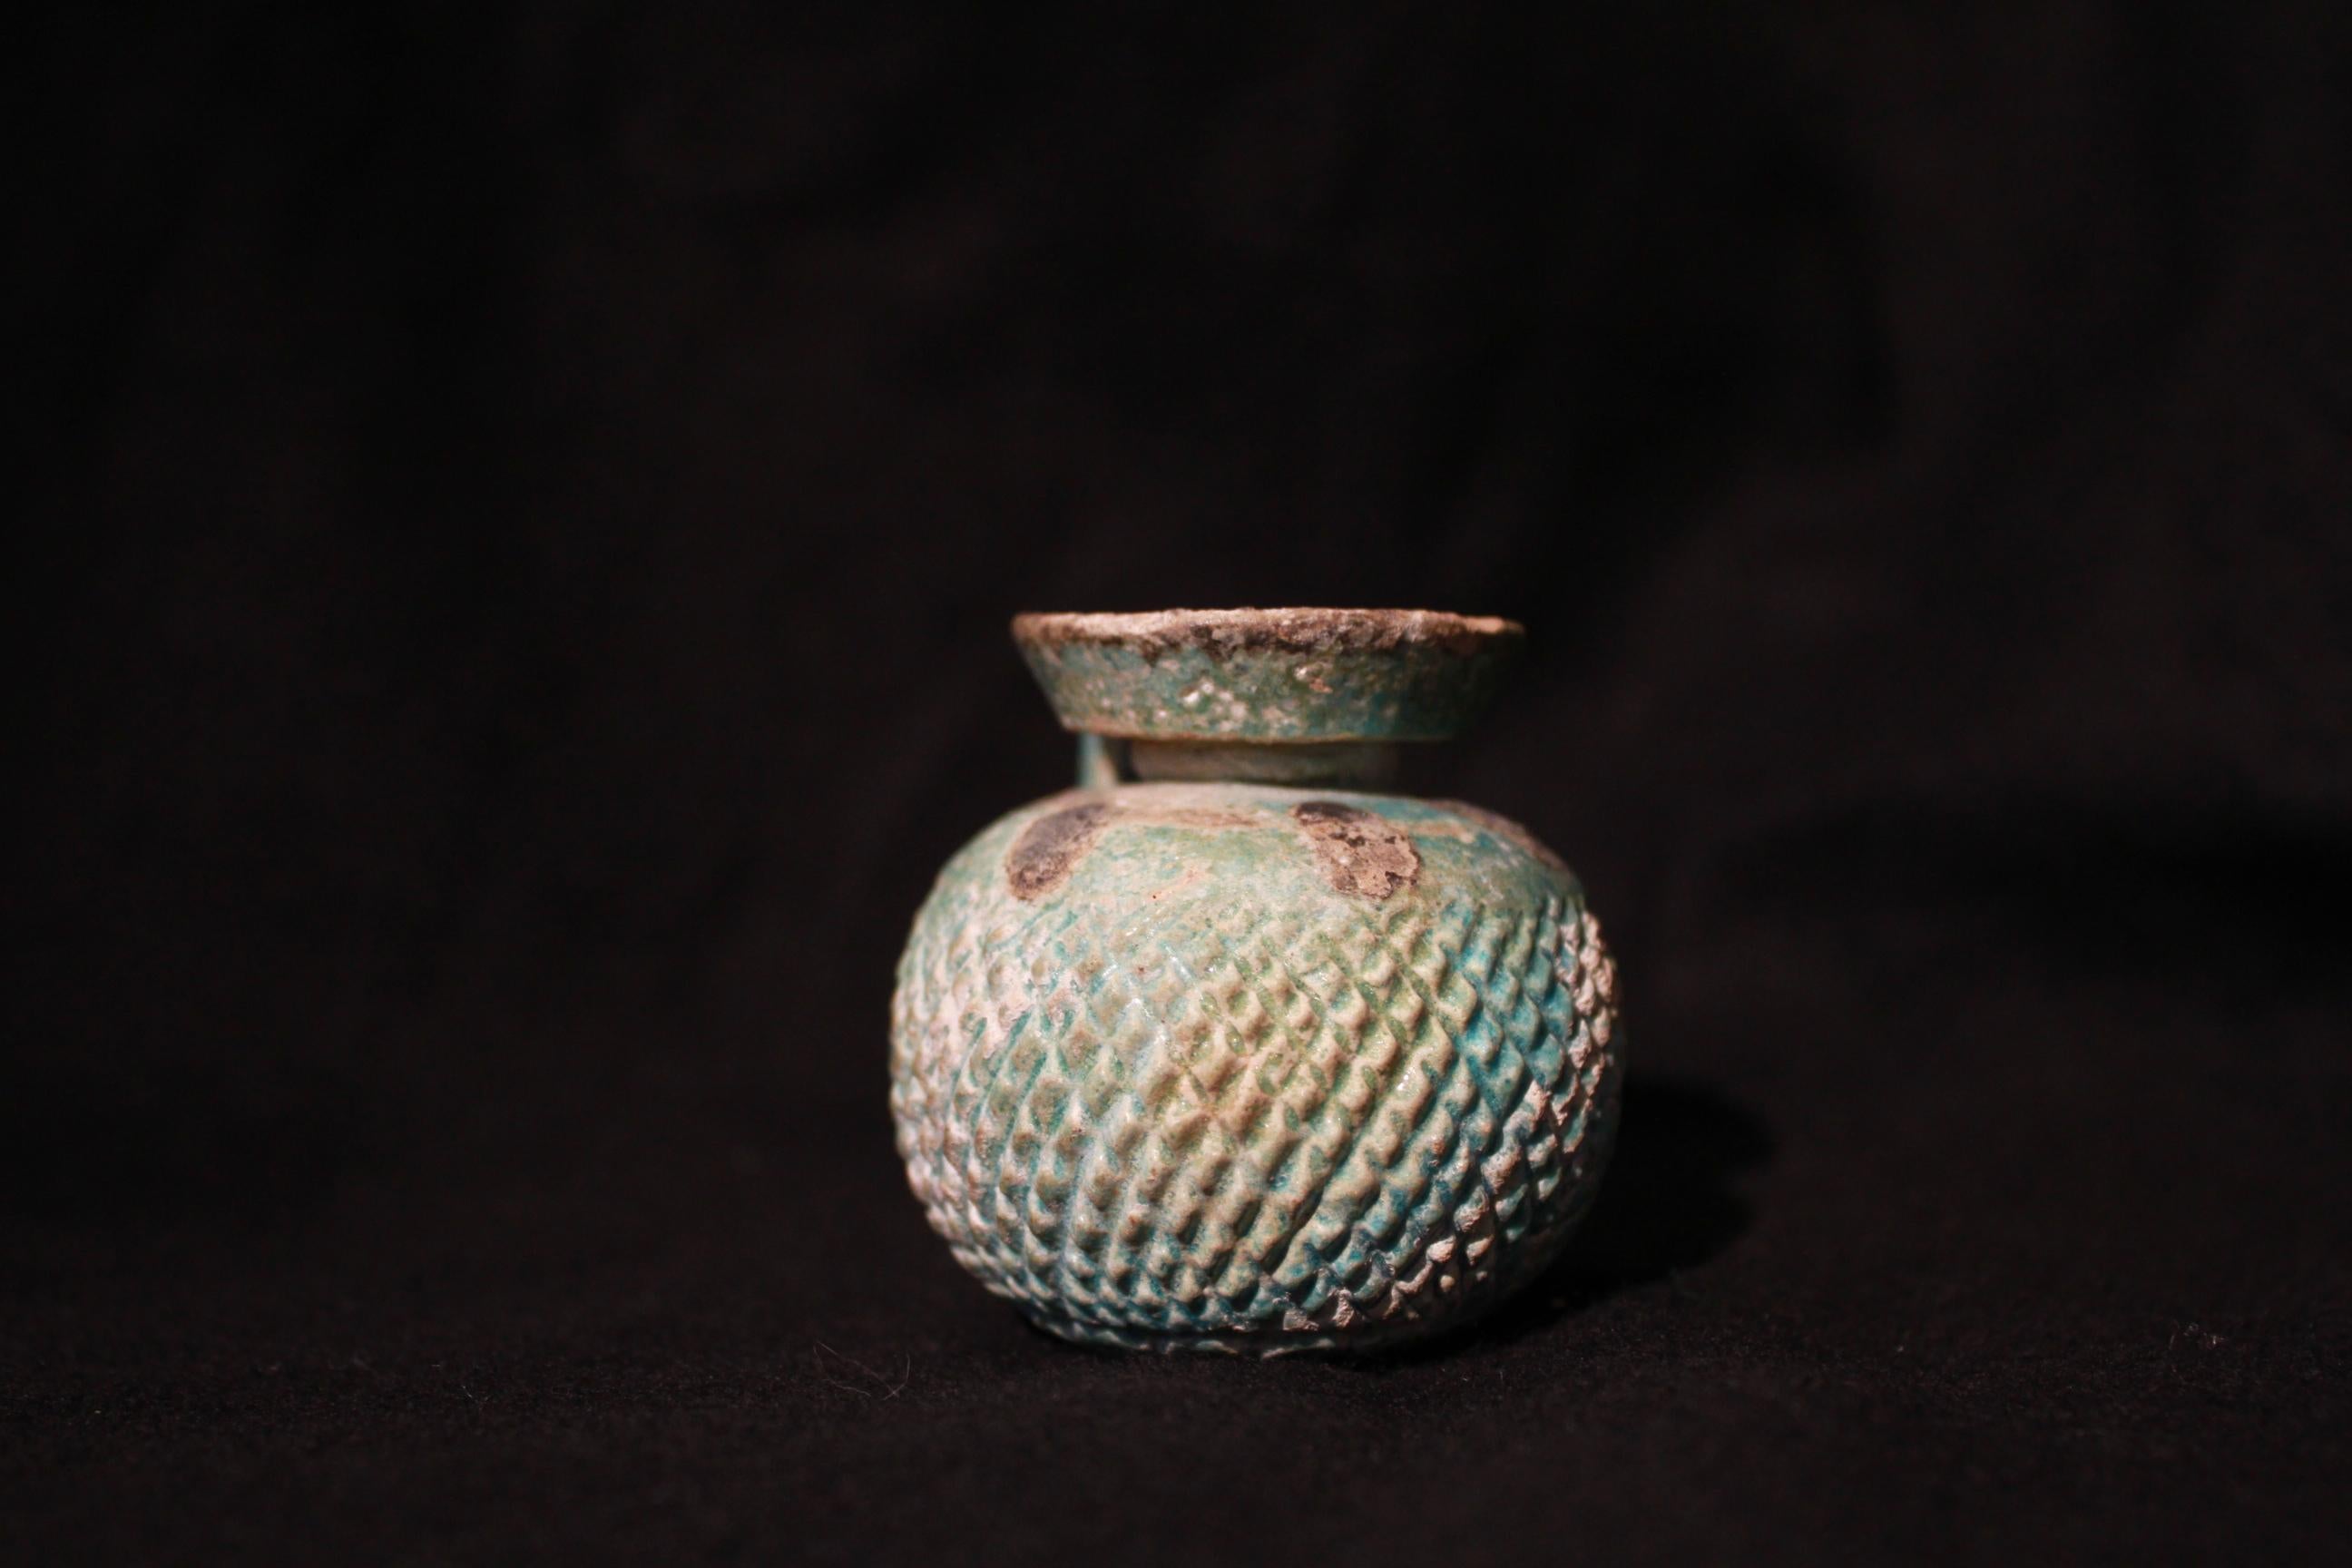 This small green faience aryballos most likely used to contain either perfume or essential oil used in private baths, banquets or funerary rituals during the antique world. Such containers are well attested for in Ancient Greece and Egypt.